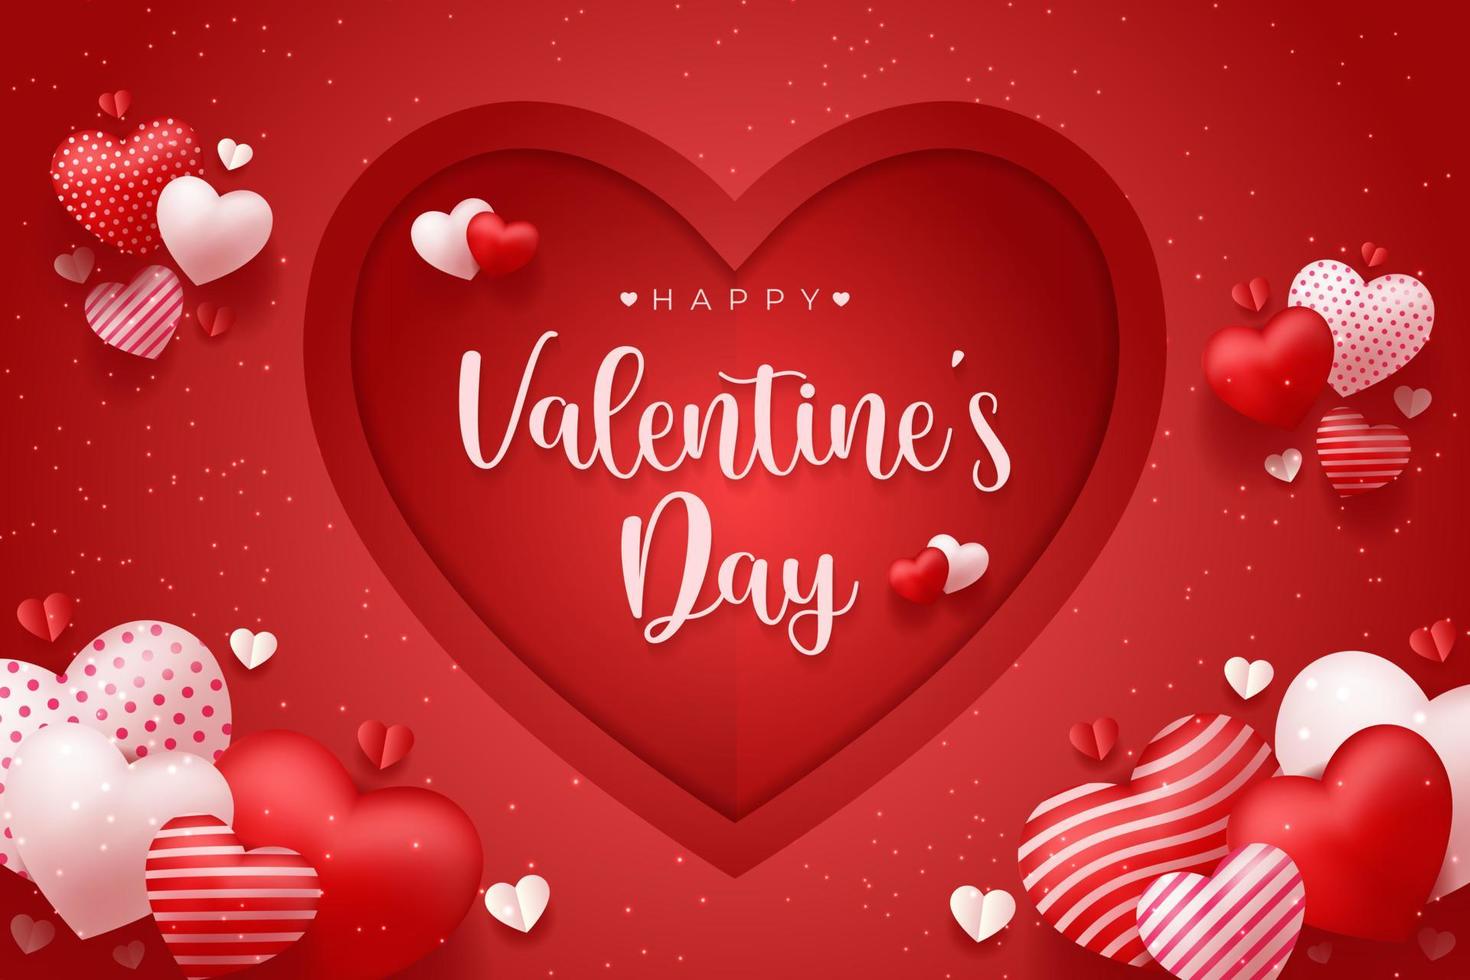 Lovely happy valentines day red background with realistic 3d hearts frame design for greeting card, poster, banner. Vector illustration.